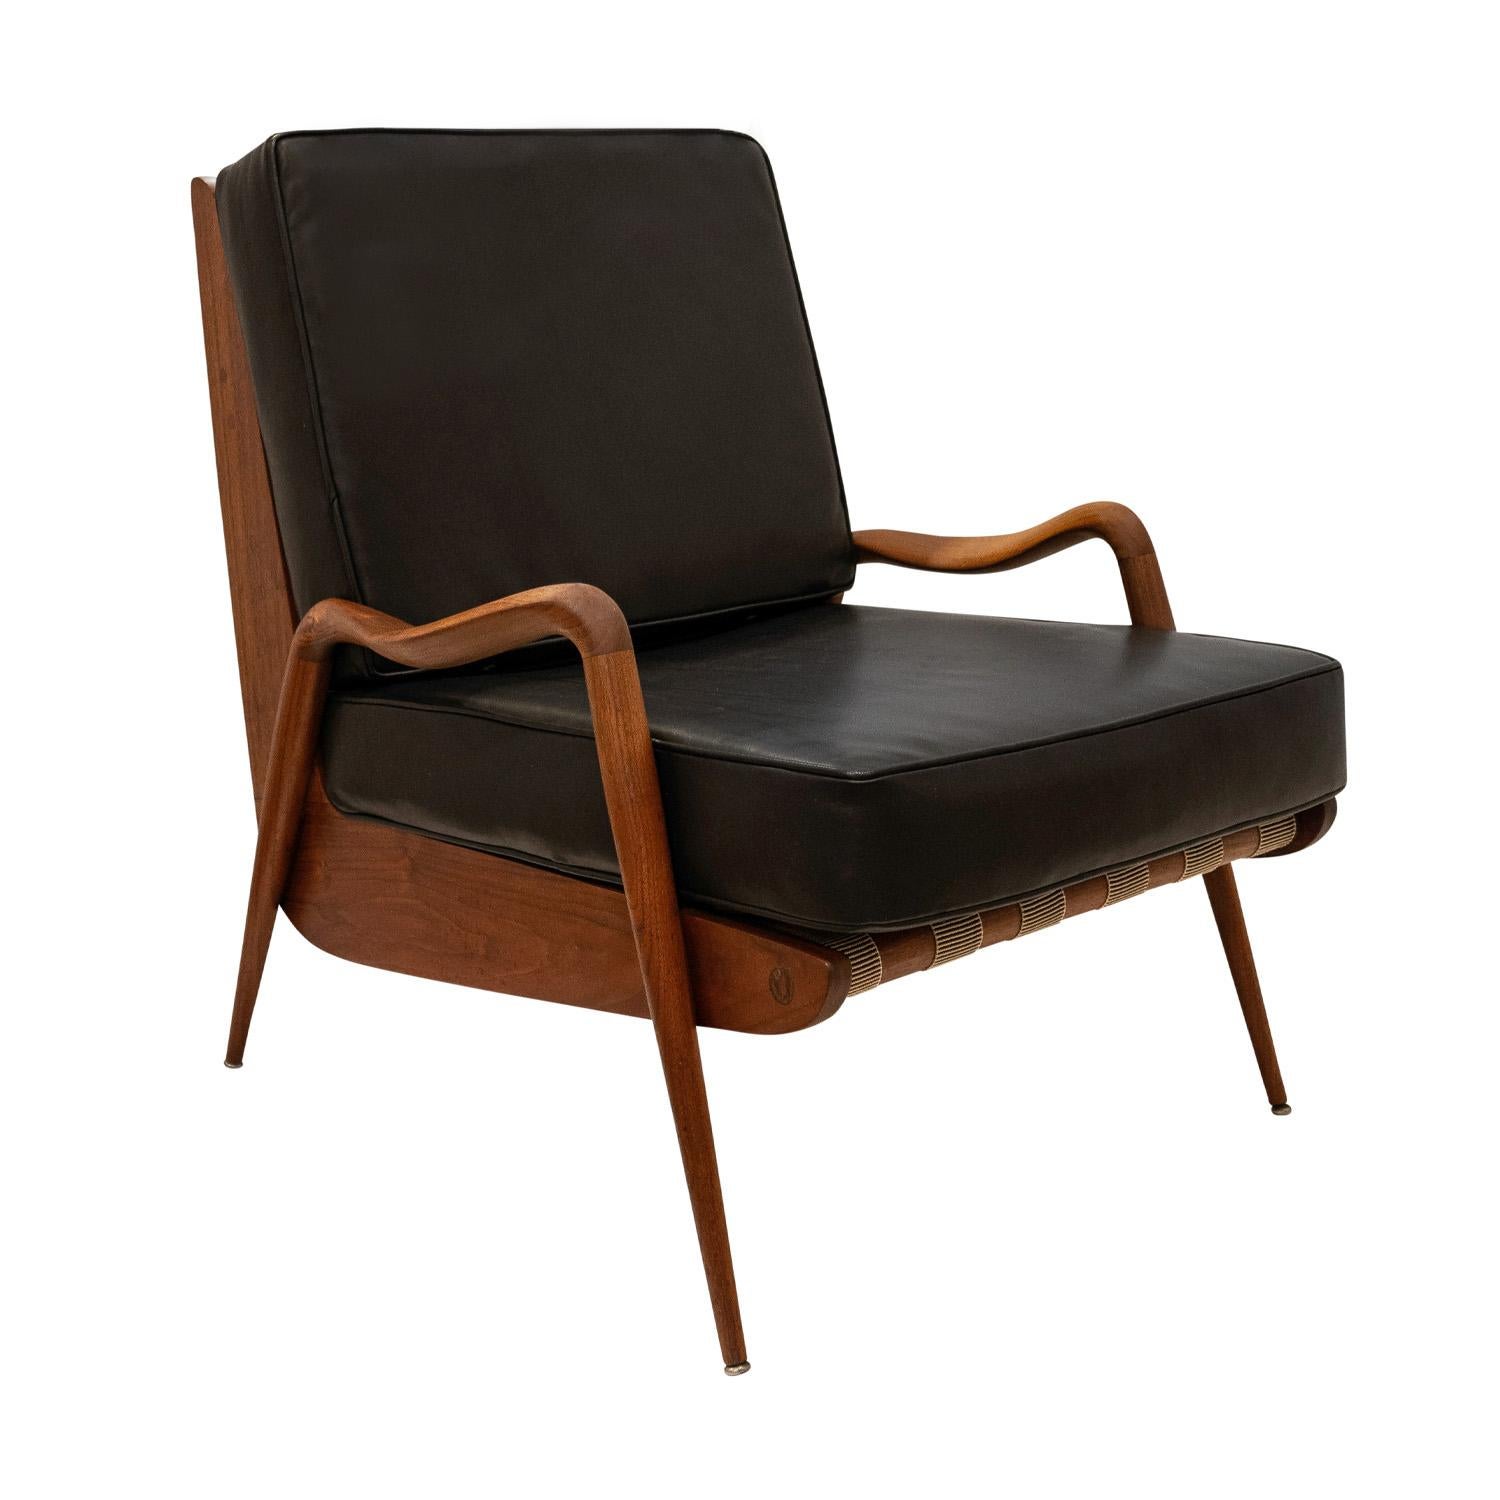 Rare high back lounge chair with frame in sculpted walnut with black leather seat and back cushions by Phillip Lloyd Powell, American early-1960’s.  The craftsmanship and attention to detail are superb.  Newly refinished and reupholstered in black